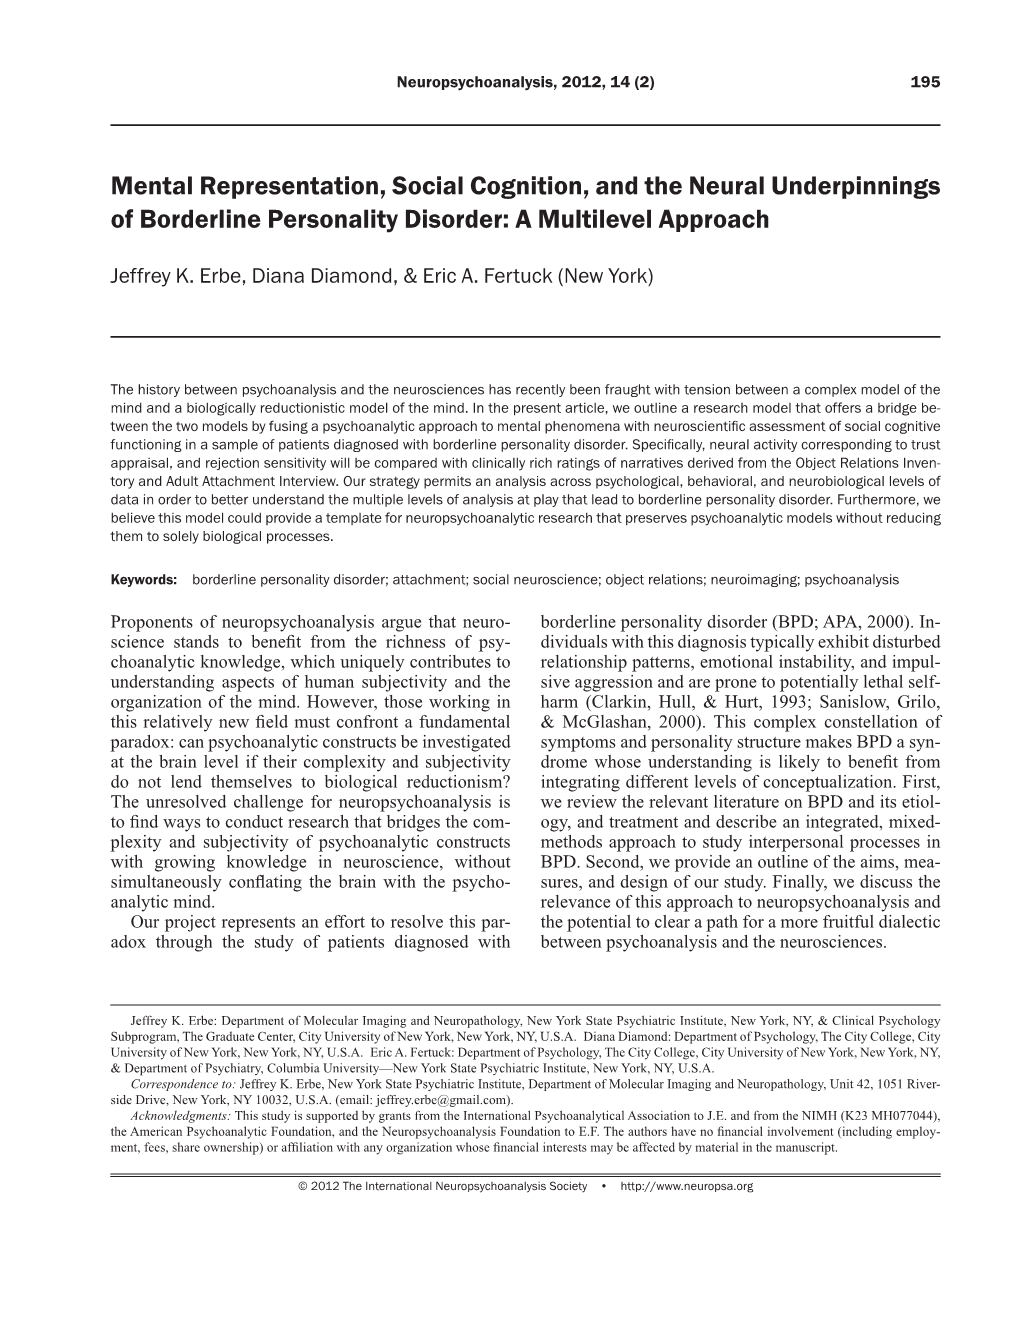 Mental Representation, Social Cognition, and the Neural Underpinnings of Borderline Personality Disorder: a Multilevel Approach